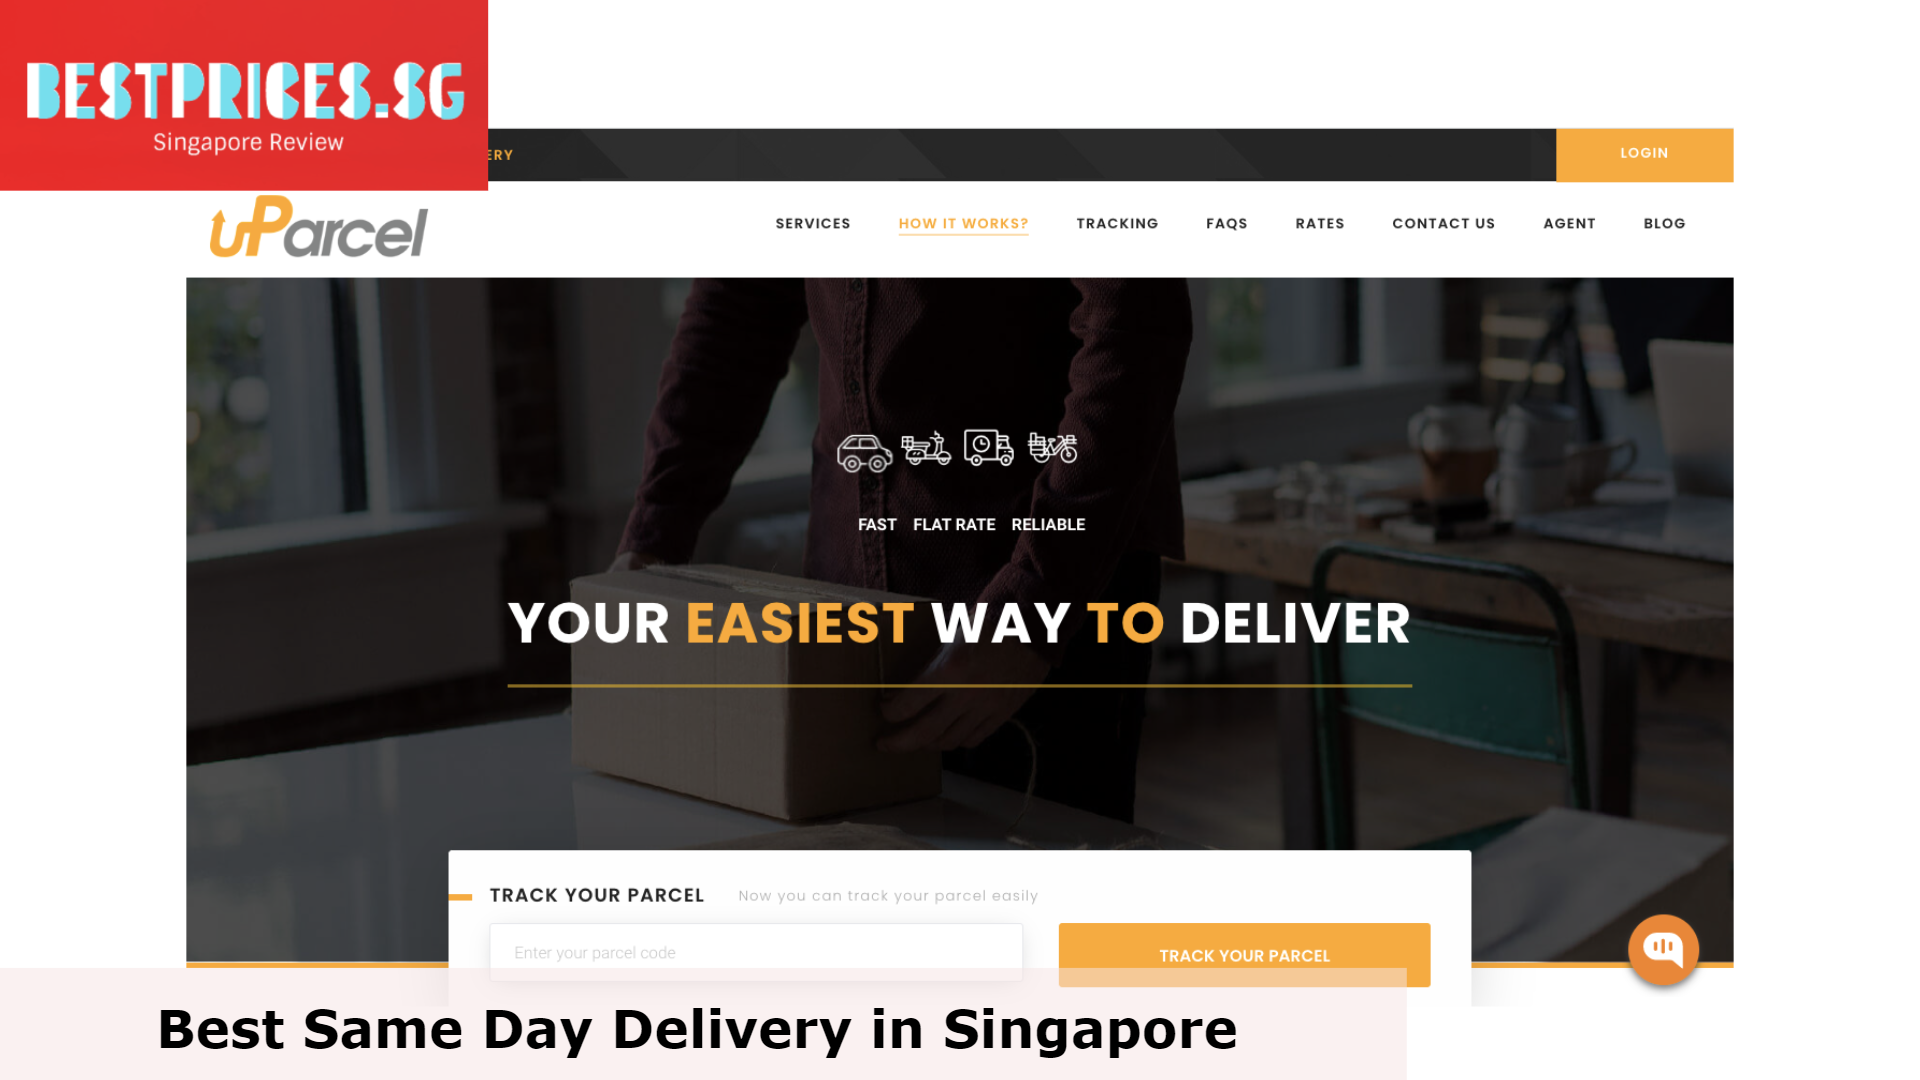 UParcel - Best Same Day Delivery in Singapore, Same Day Delivery Singapore, Express Delivery in 1 hour, Same Day Delivery Courier Options In Singapore, Same-Day Delivery Gifts In Singapore, Best Courier Services in Singapore, Which delivery app is the cheapest Singapore?, Which courier service has lowest fees?, cheapest same day delivery singapore, same day delivery singapore gifts, same day delivery online shopping singapore, same day delivery singapore food, birthday gift same day delivery singapore, door to door delivery singapore, same day delivery singapore cake, same day delivery singapore flowers, 